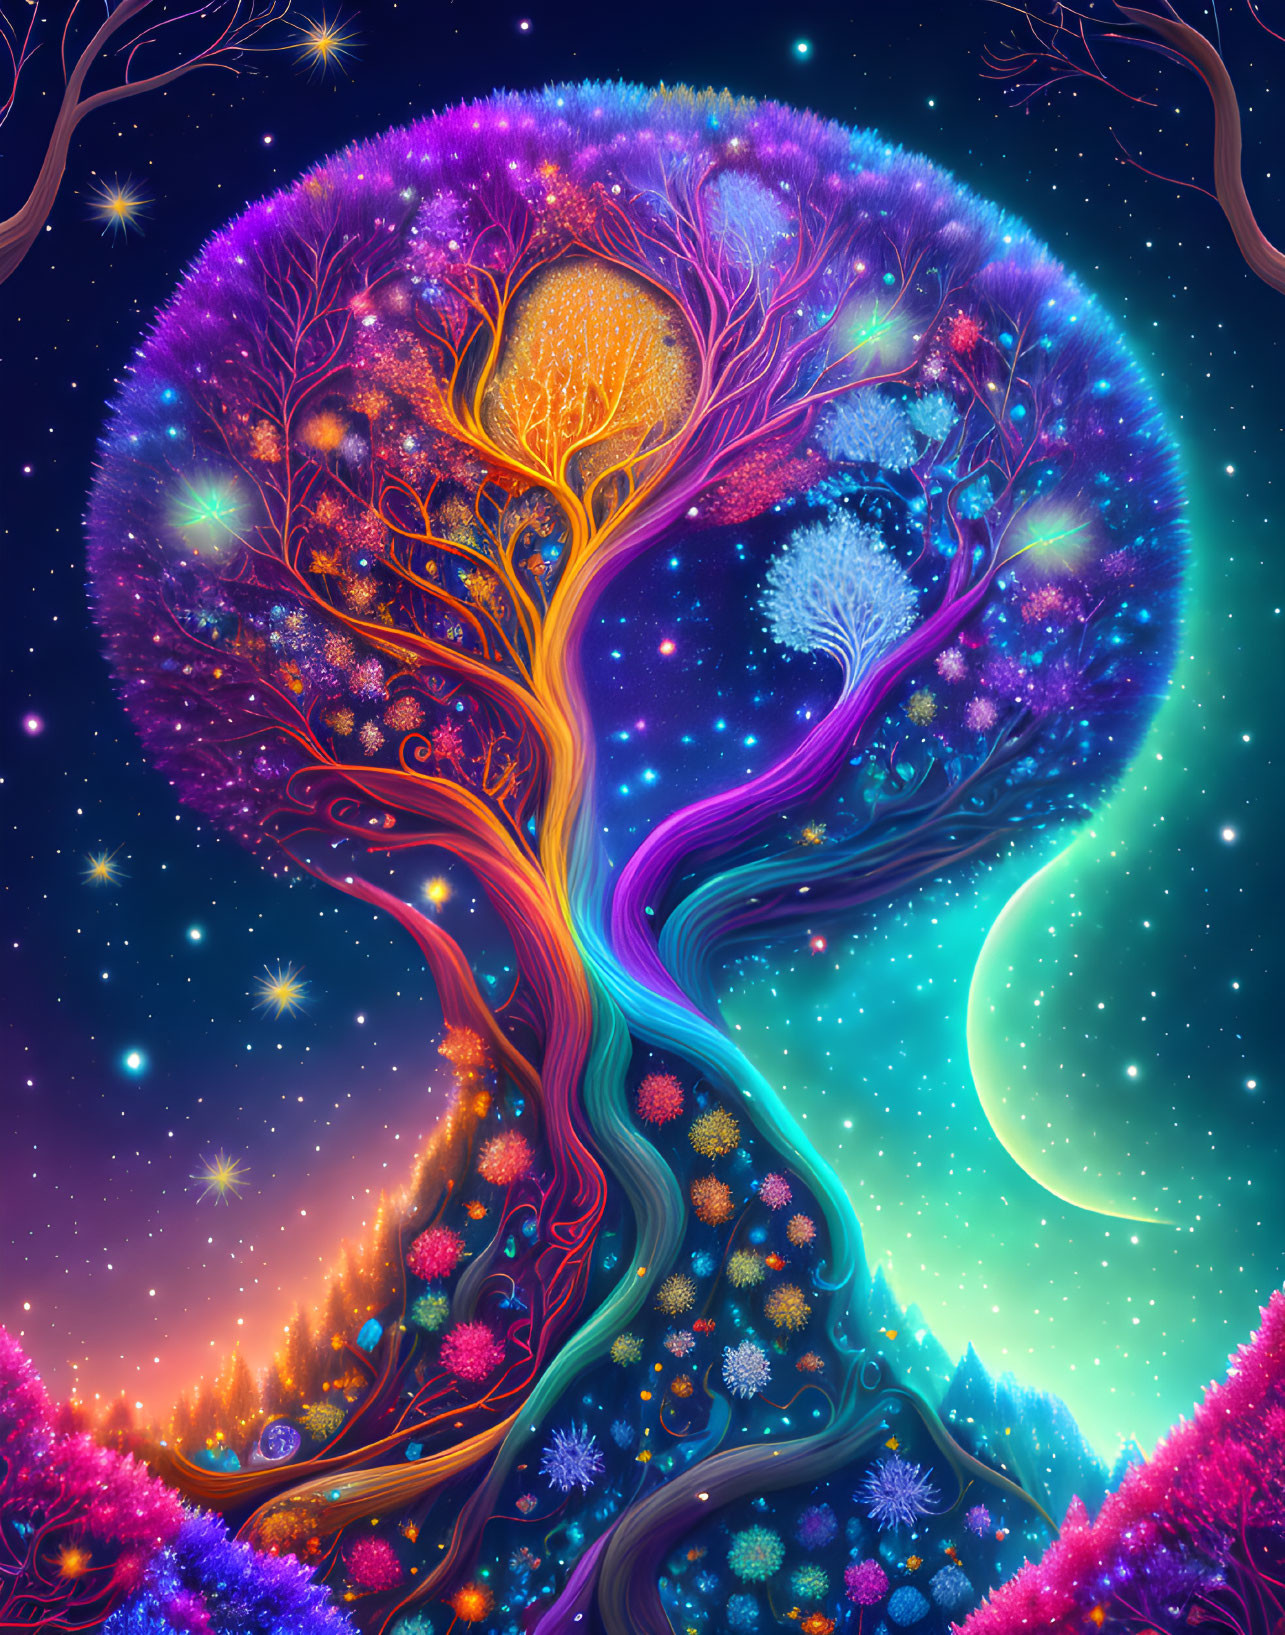 Whimsical tree illustration with seasonal branches under starry sky